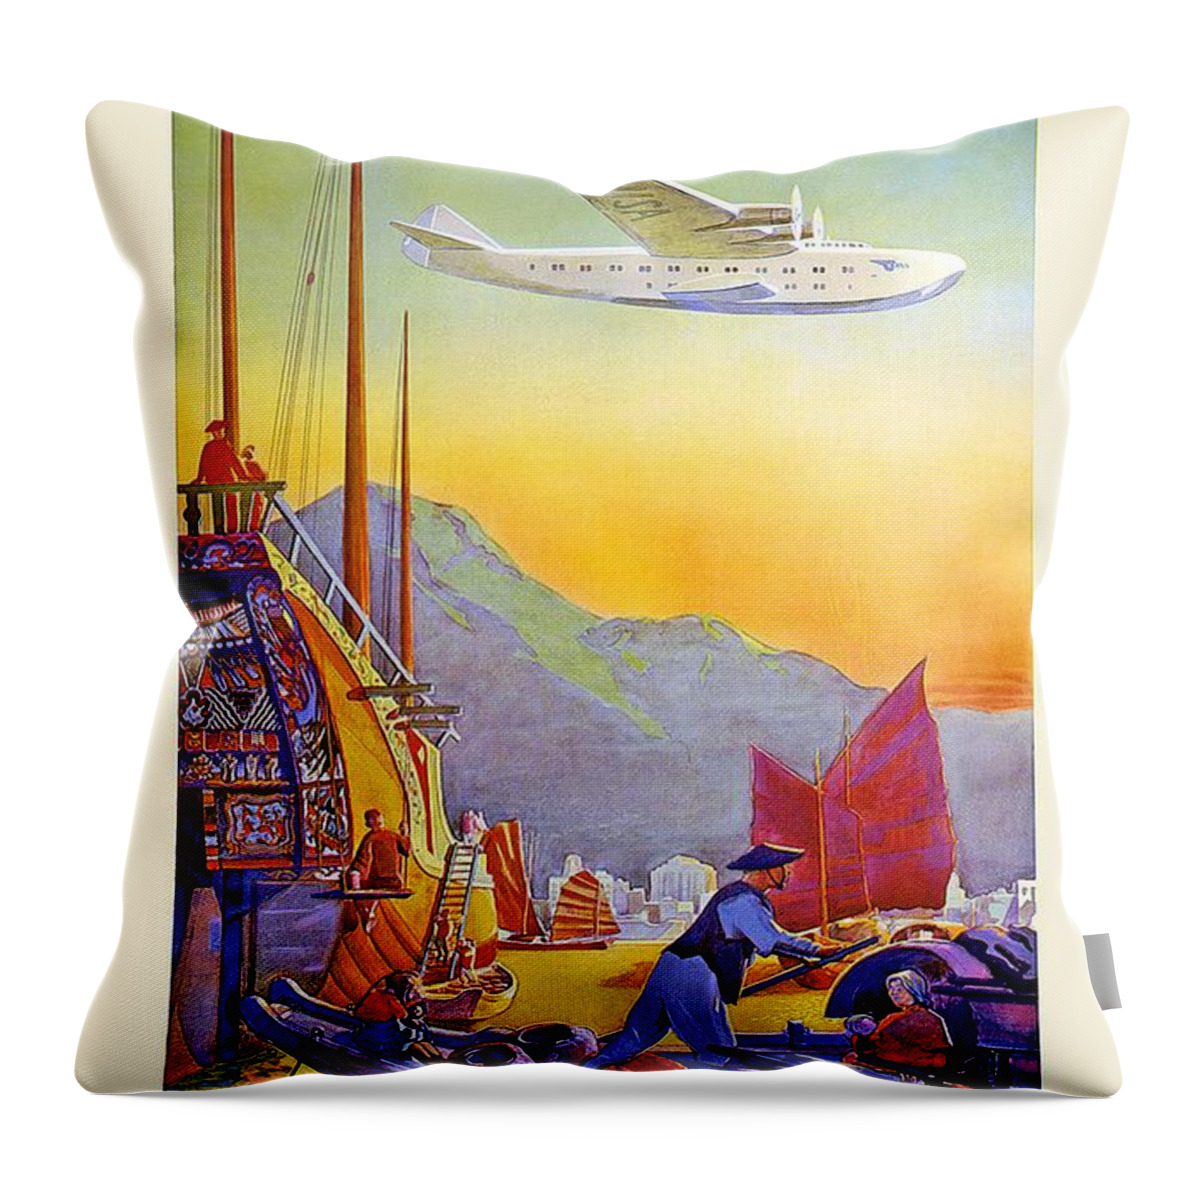 Transpacific Flight Throw Pillow featuring the painting Transpacific Flight - Pan American Airways - Vintage Advertising Poster by Studio Grafiikka